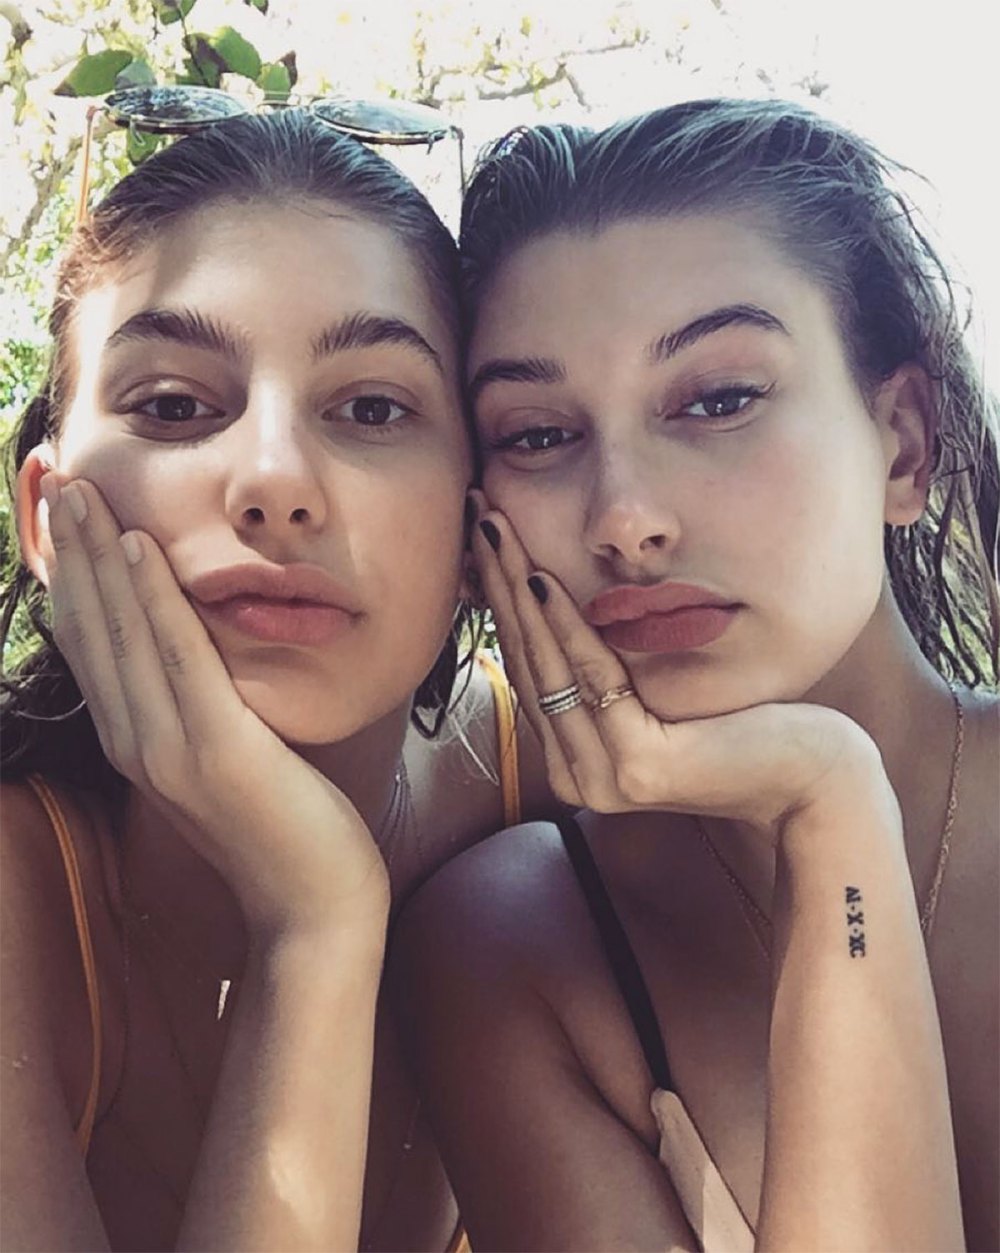 Hailey Bieber Reveals Which Is Her Most Meaningful Tattoo